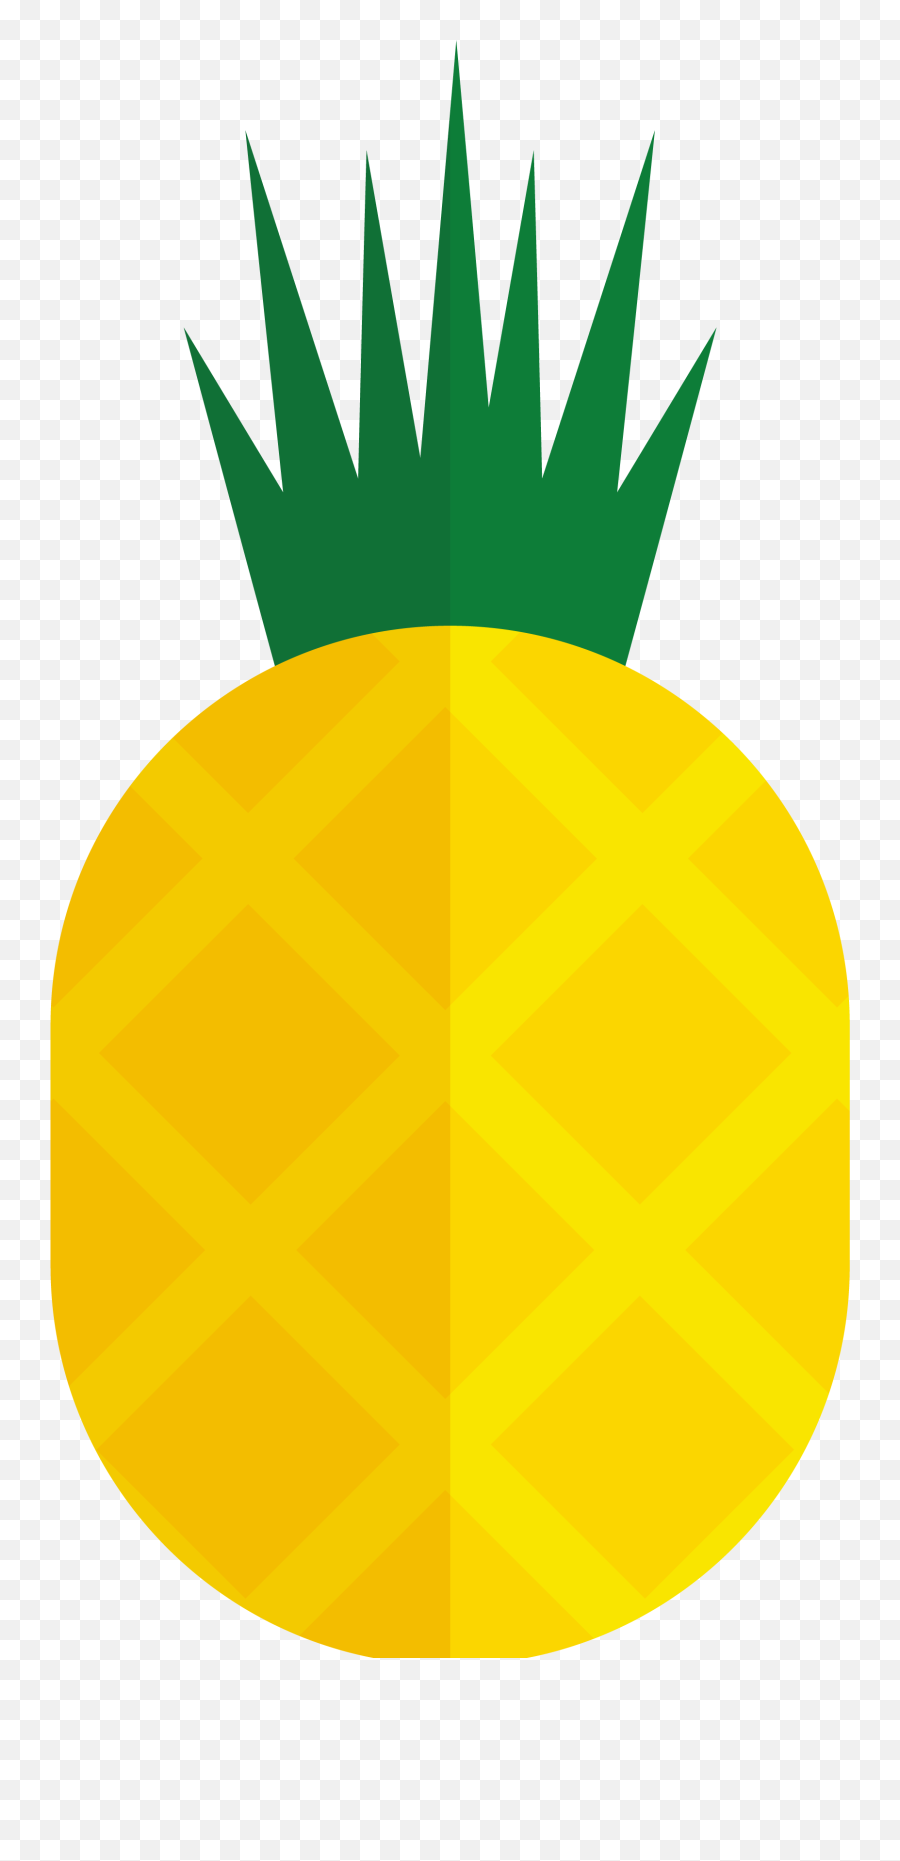 Collection Of Free Pineapple Vector Leaf Cartoon Pineapple Emoji,Cute Pineapple Clipart